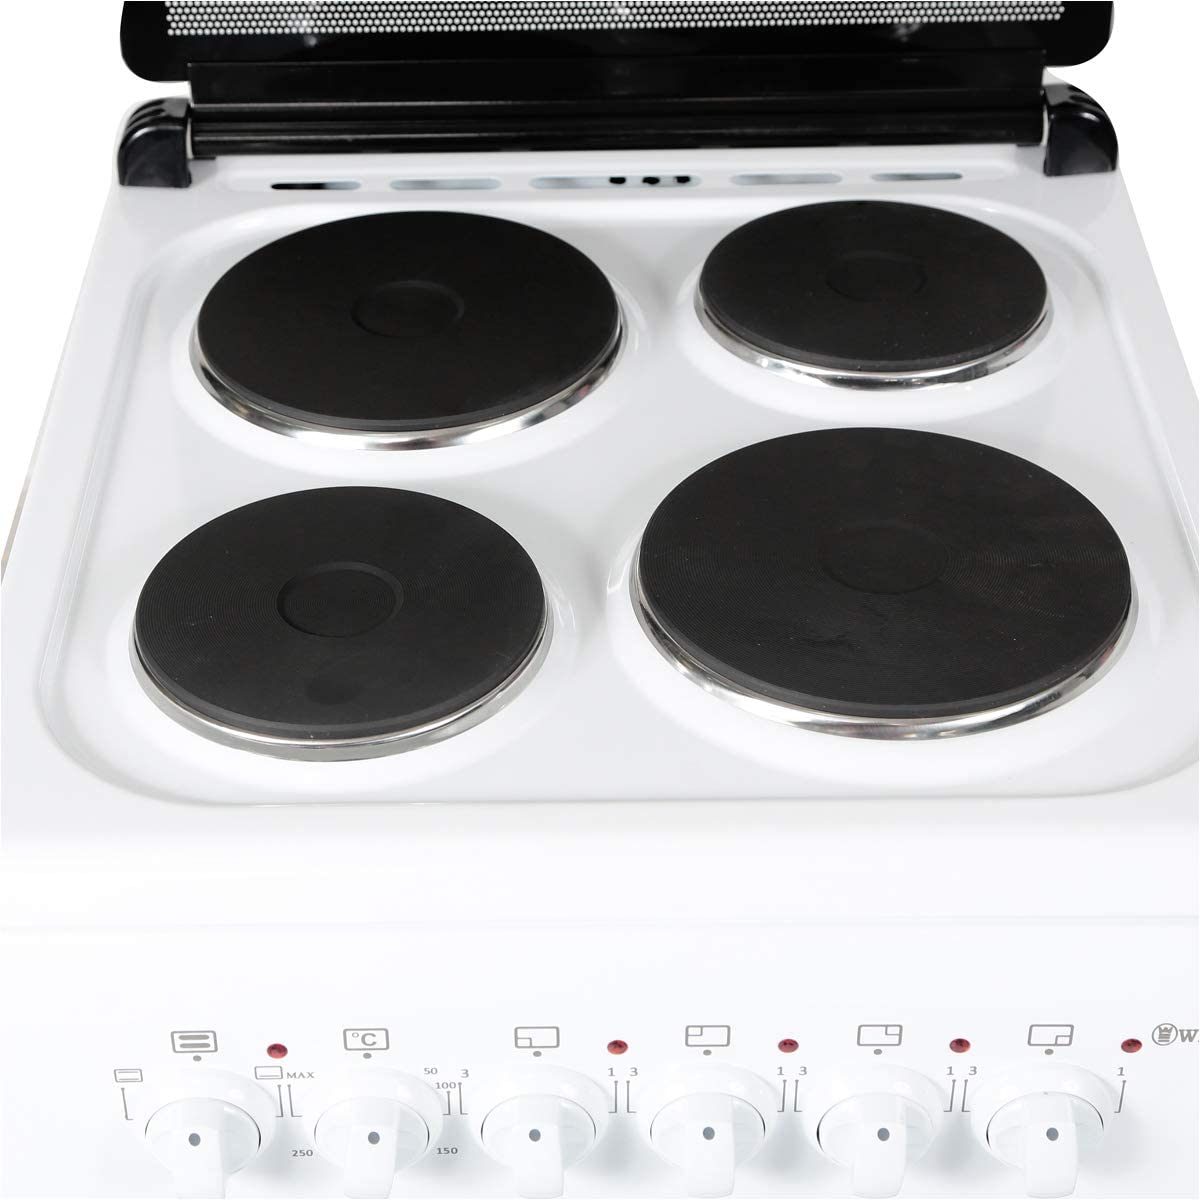 Westpoint 50cm Electric Range Oven - WCER-5604E - 2071MALL